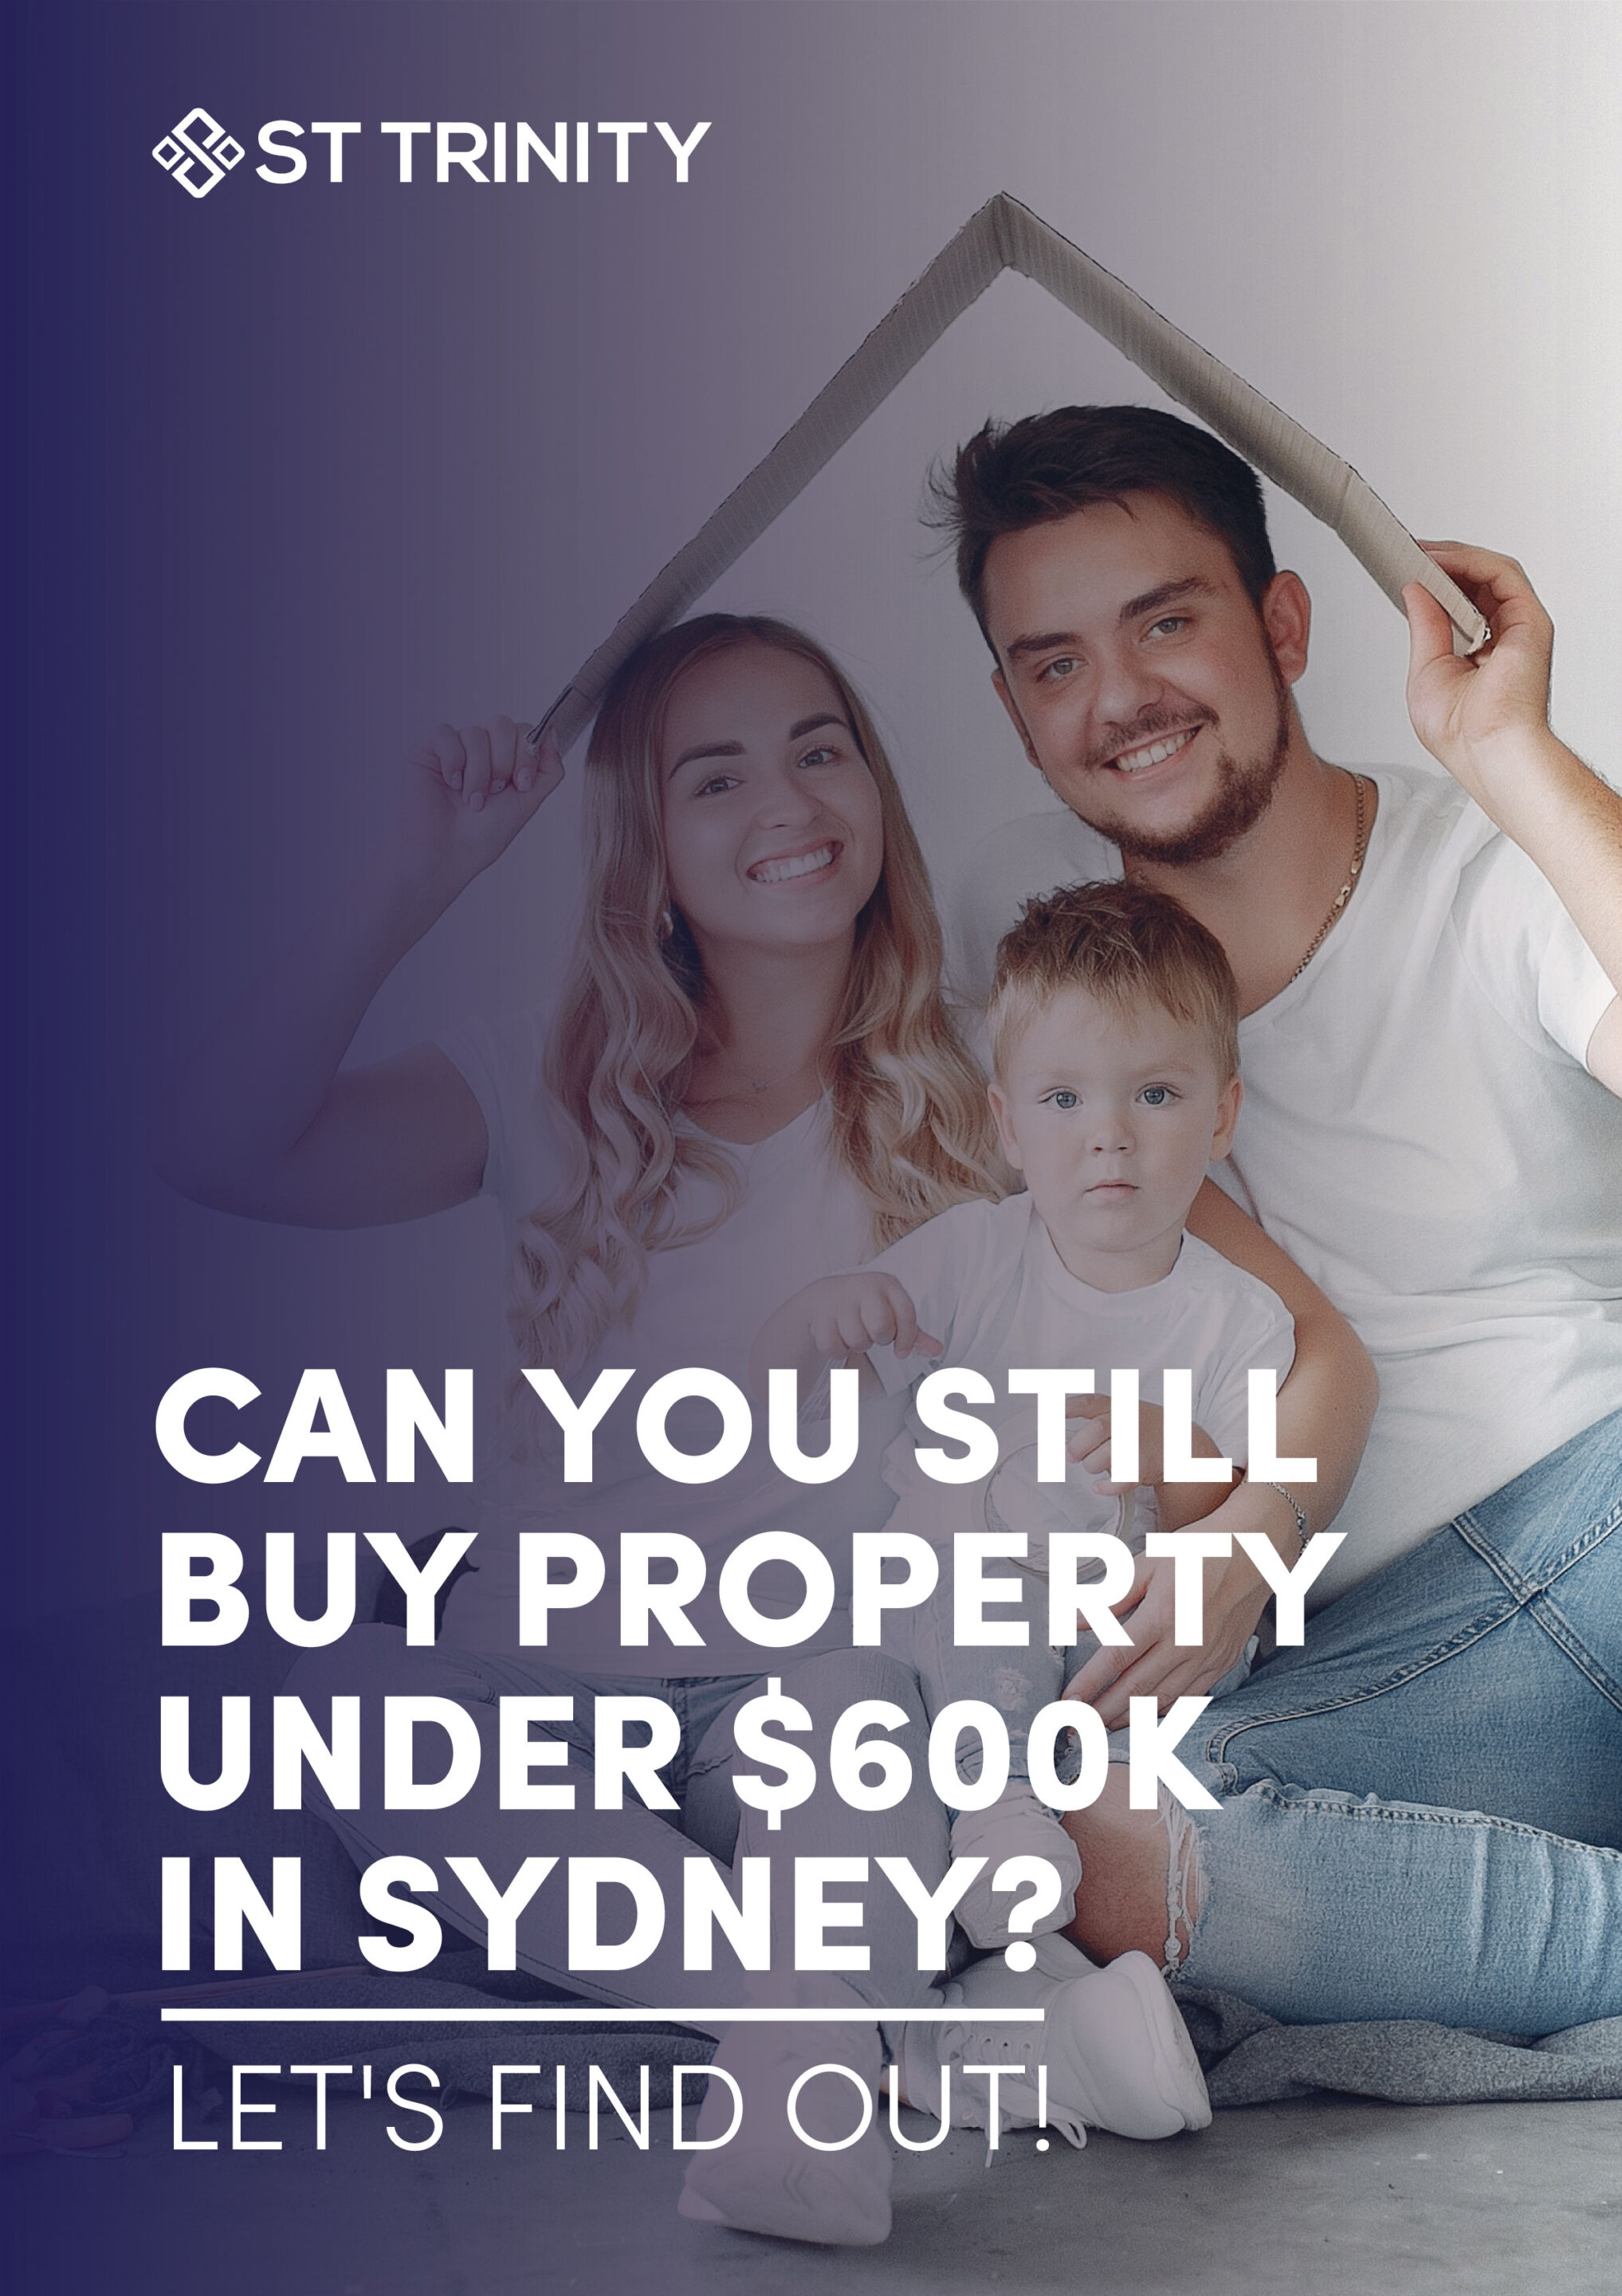 Can You Still Buy Property In Sydney Under $600K Ebook Cover Photo